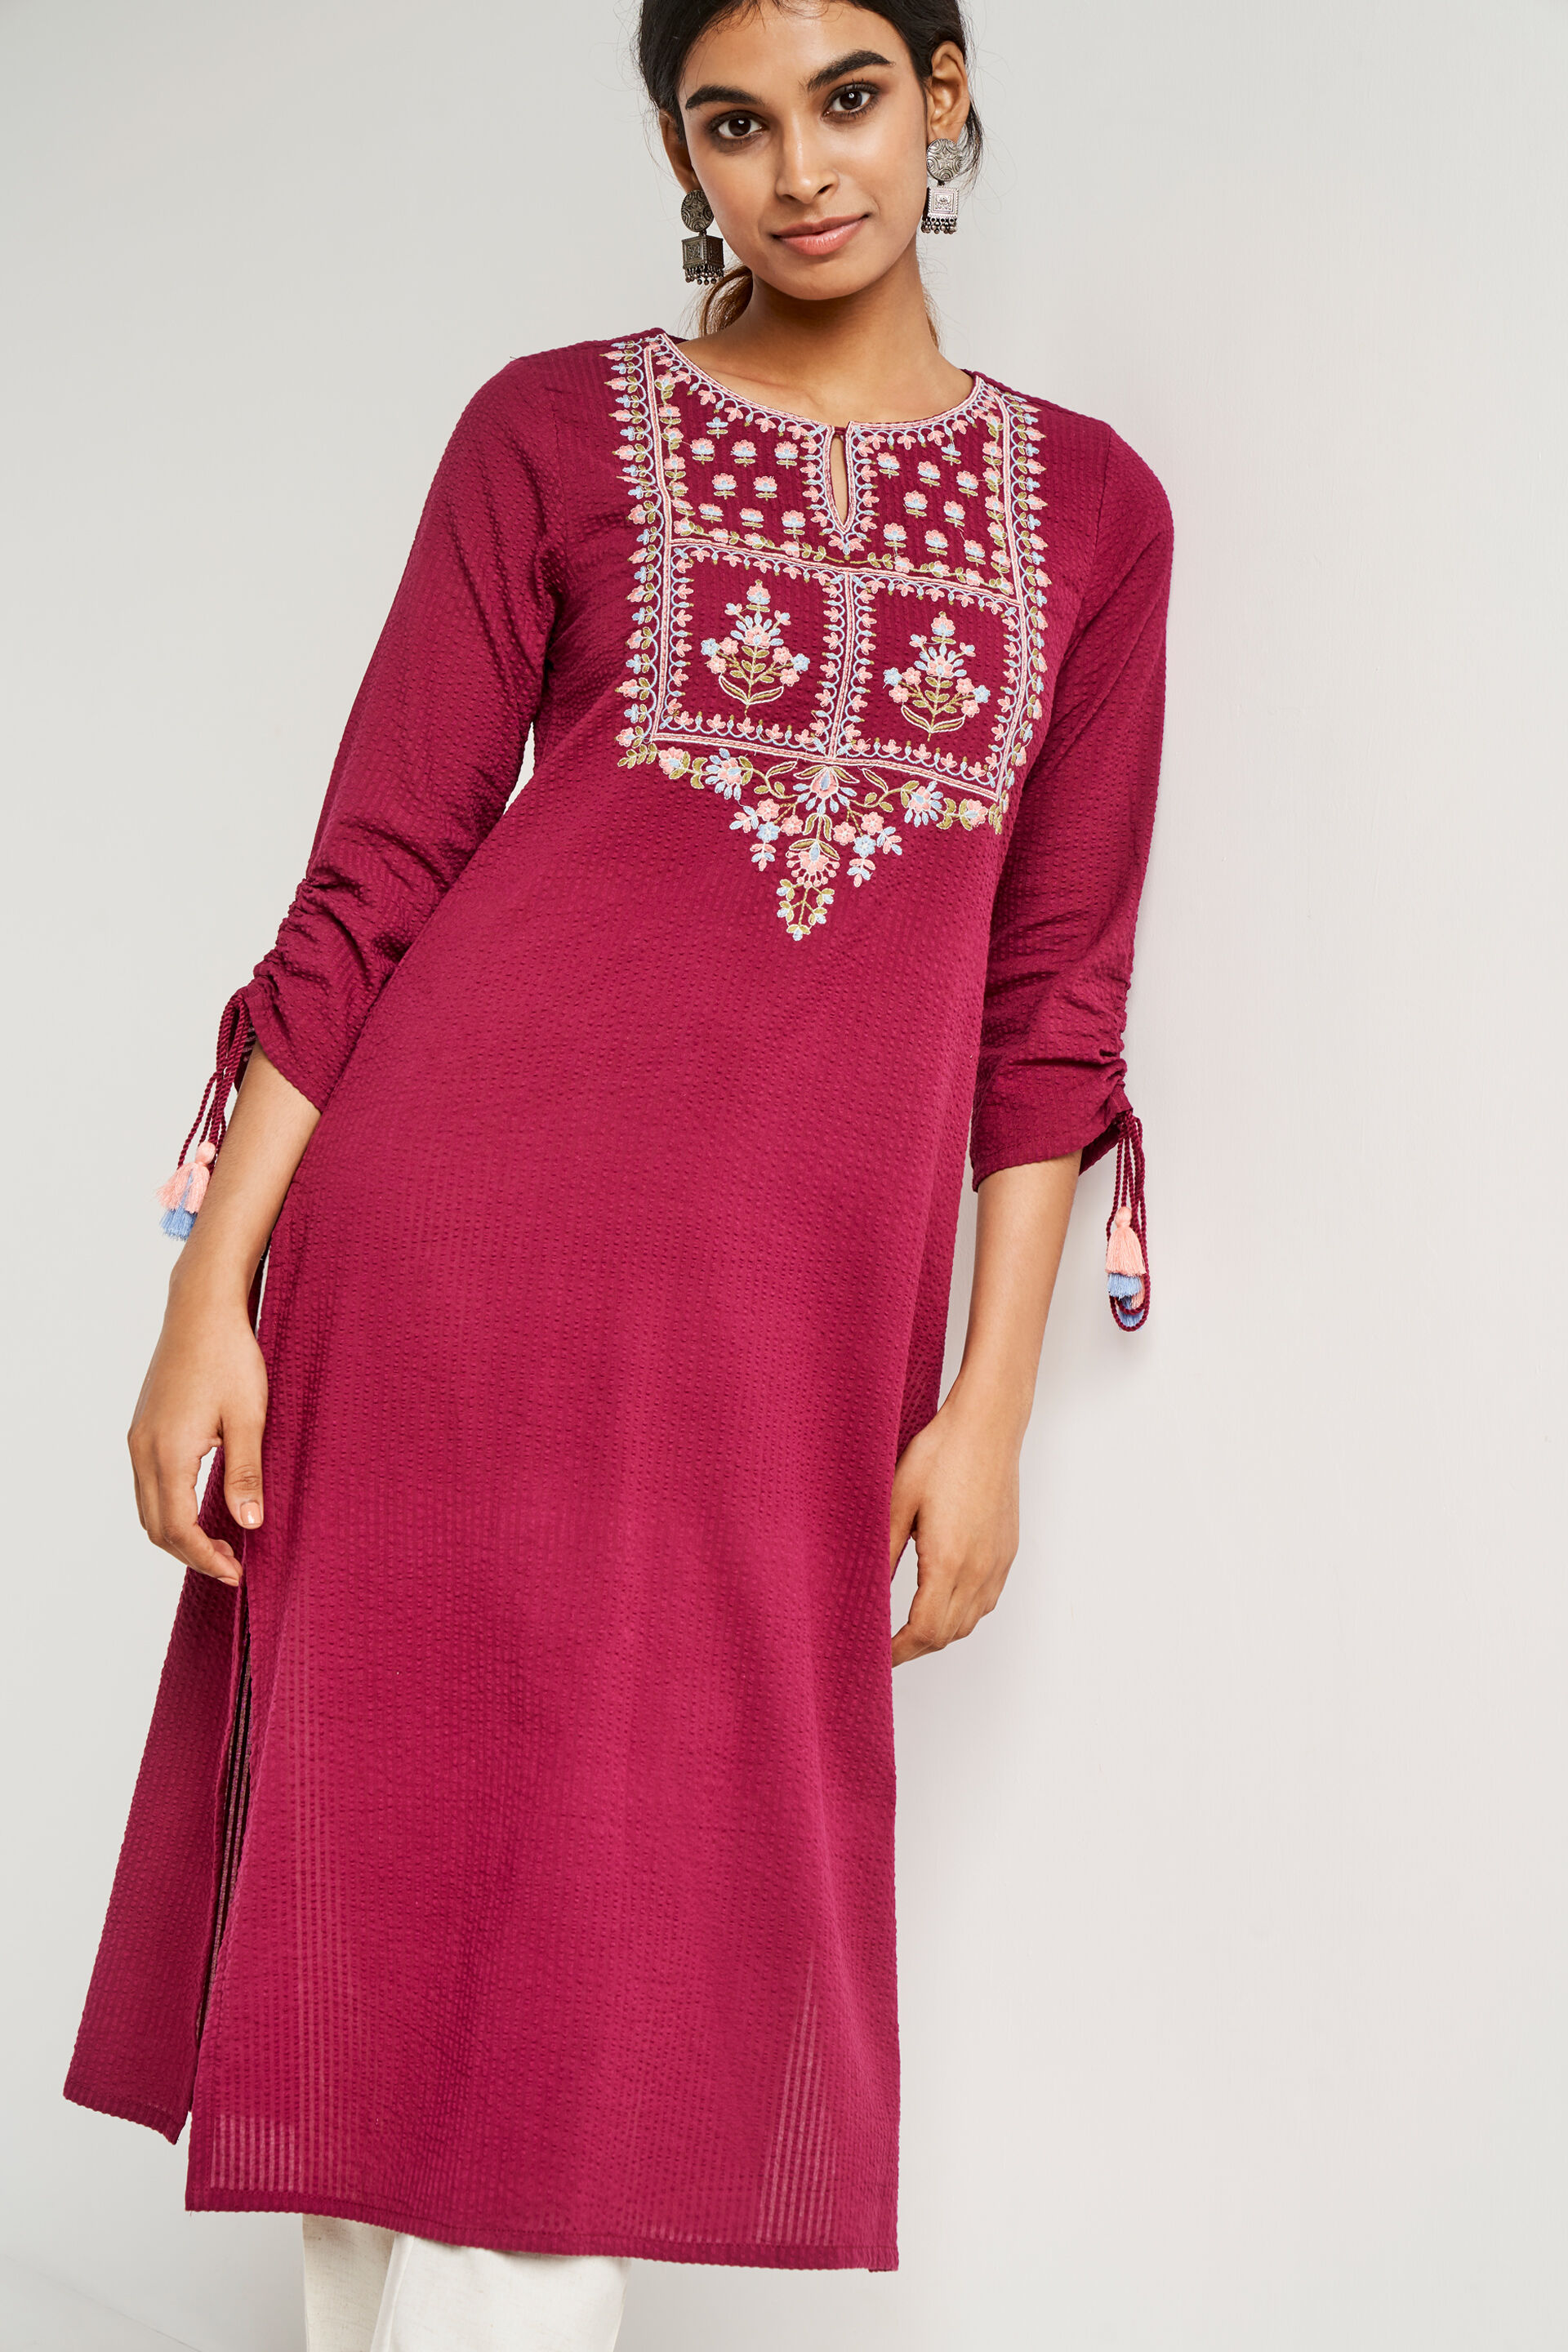 Global Desi Dark Pink Printed Fit and Flare Kurta Price in India, Full  Specifications & Offers | DTashion.com